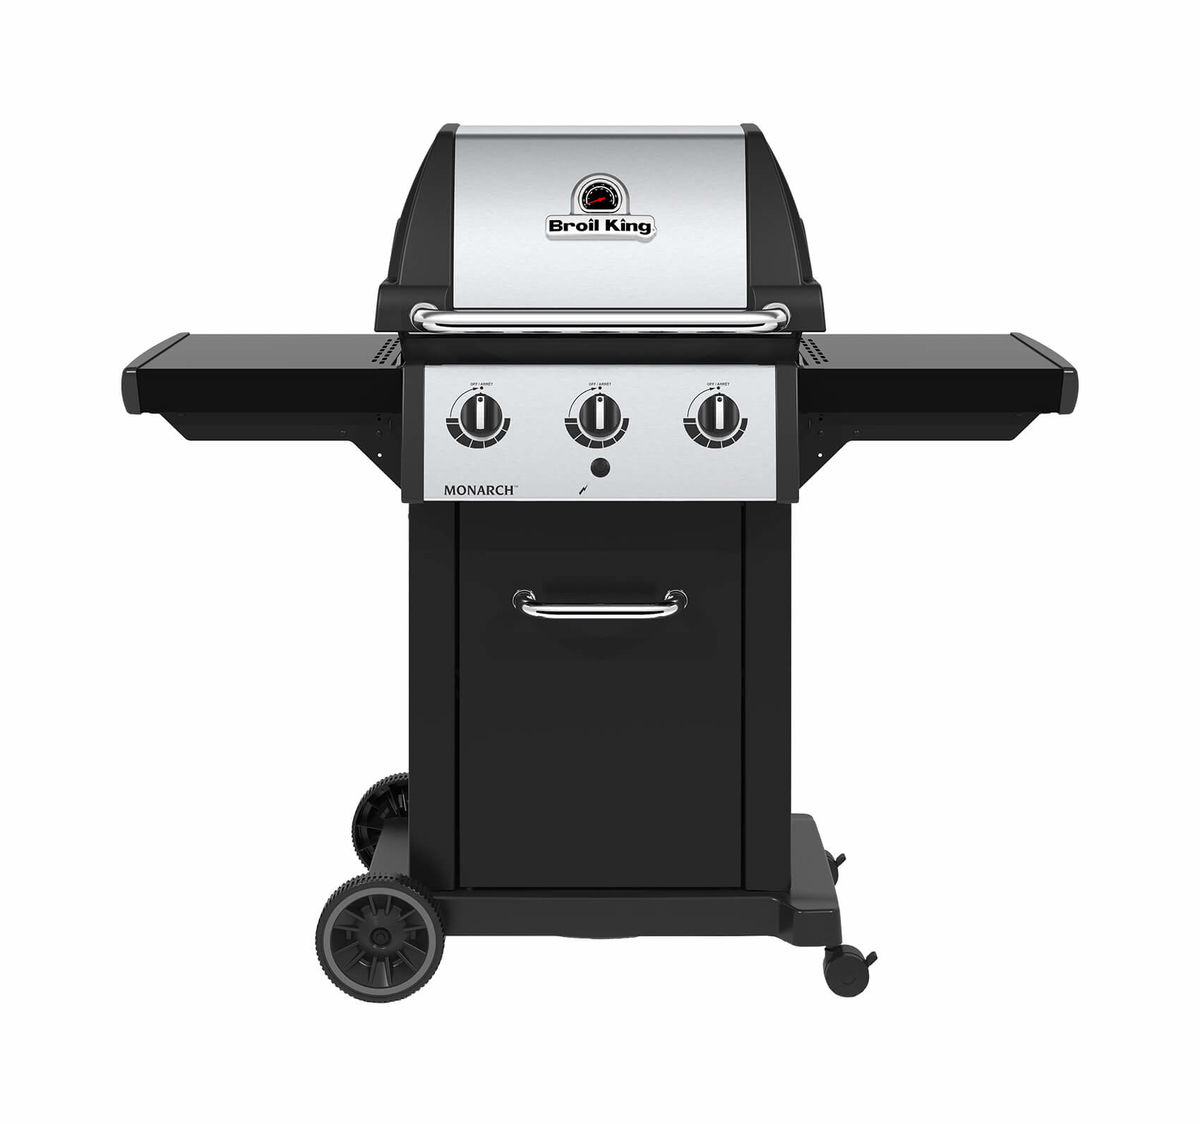 Image of Broil King Monarch 320 Gasgrill bei nettoshop.ch